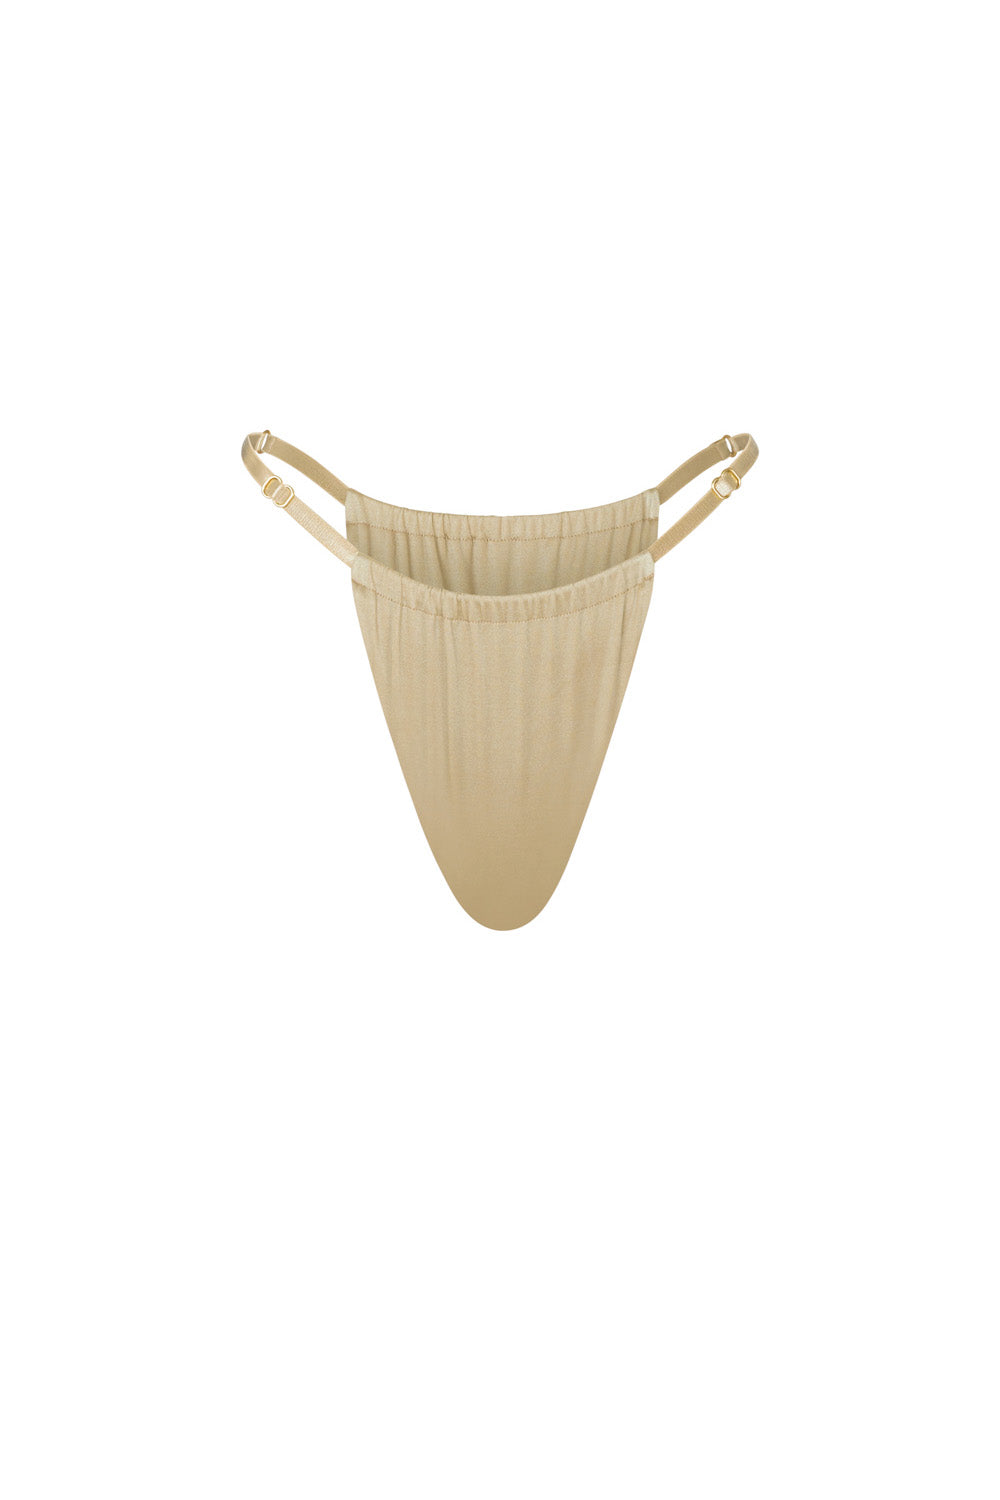 flook the label lillia brief swimwear gold product image front